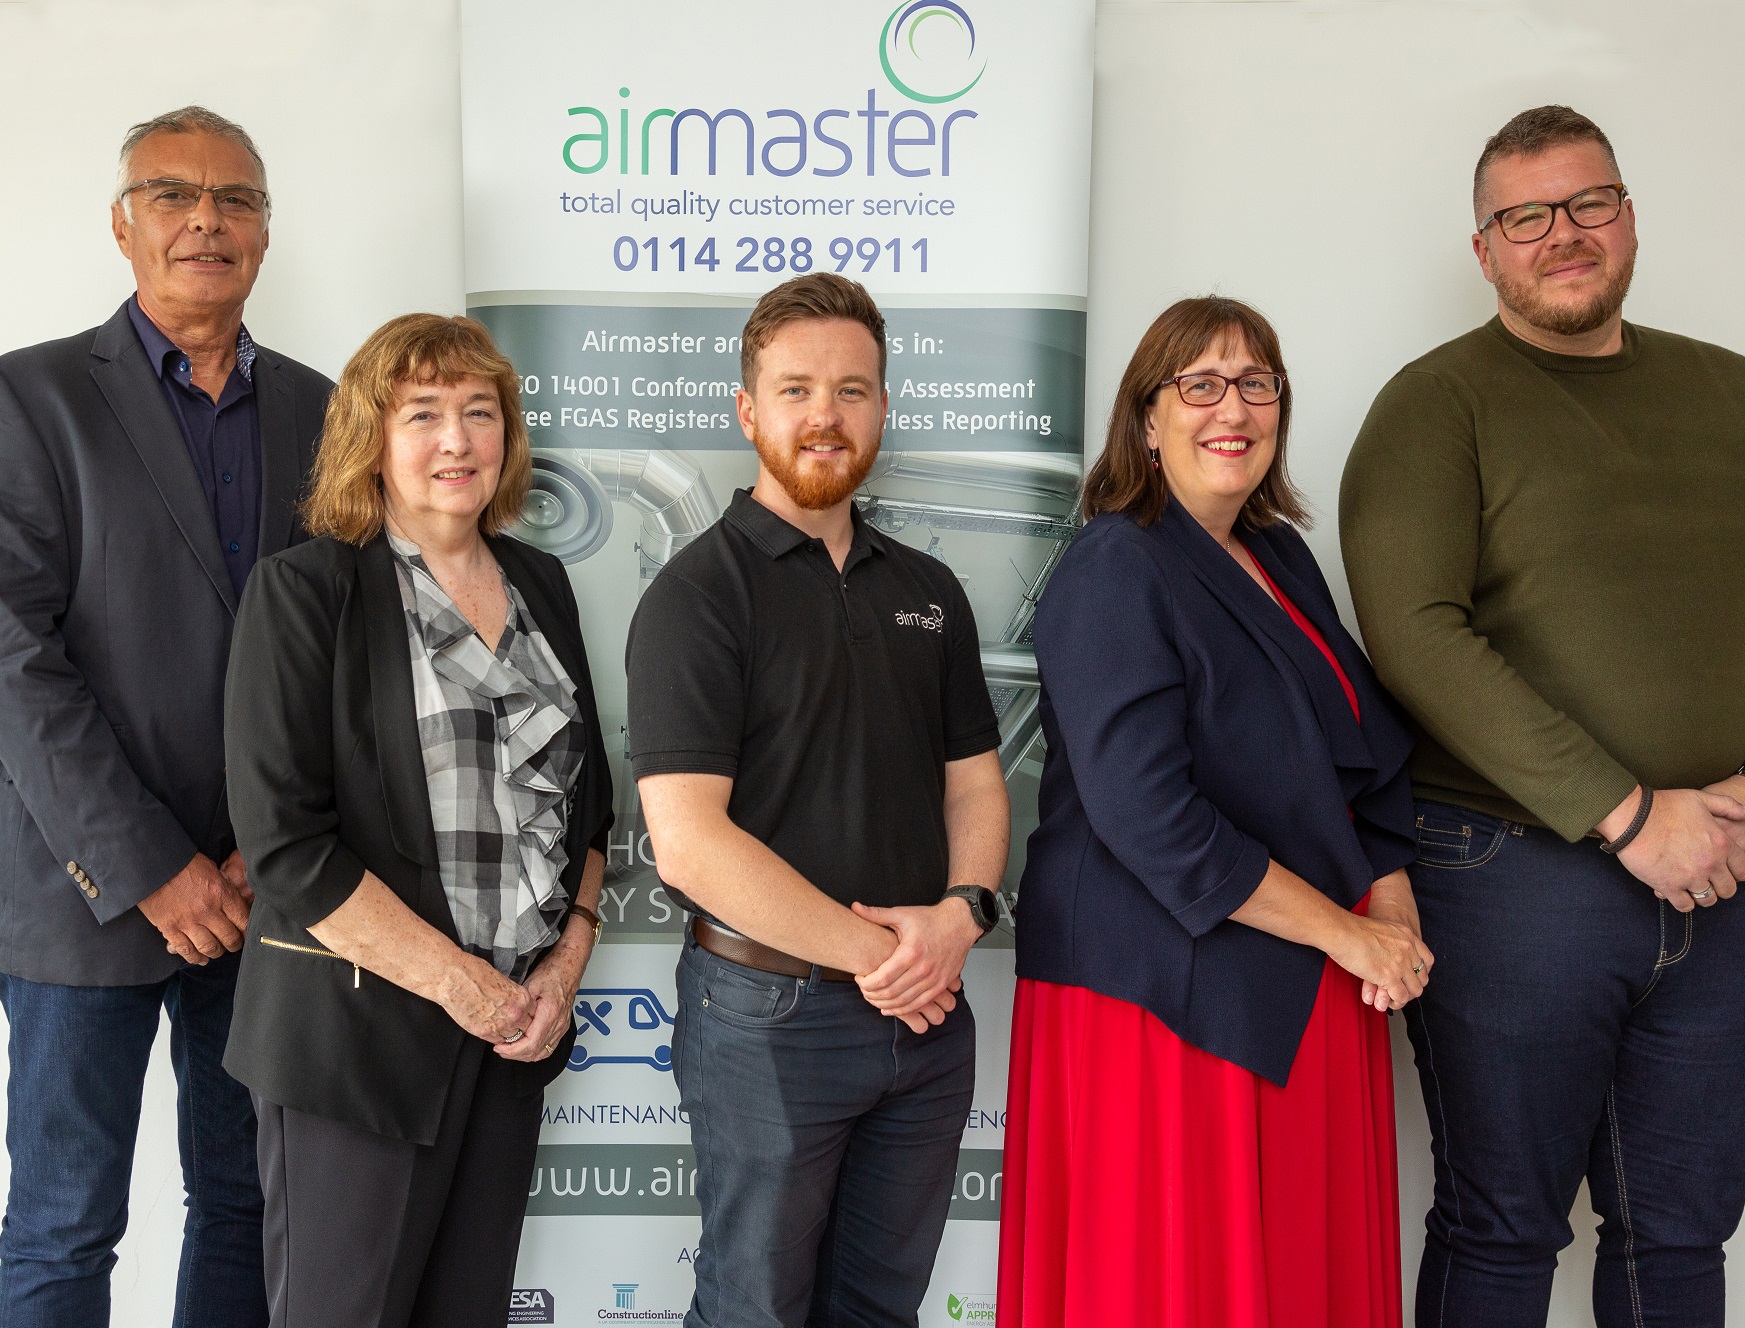 First image for, Employees become beneficiaries of an Employee Owned Trust at Airmaster!, news article